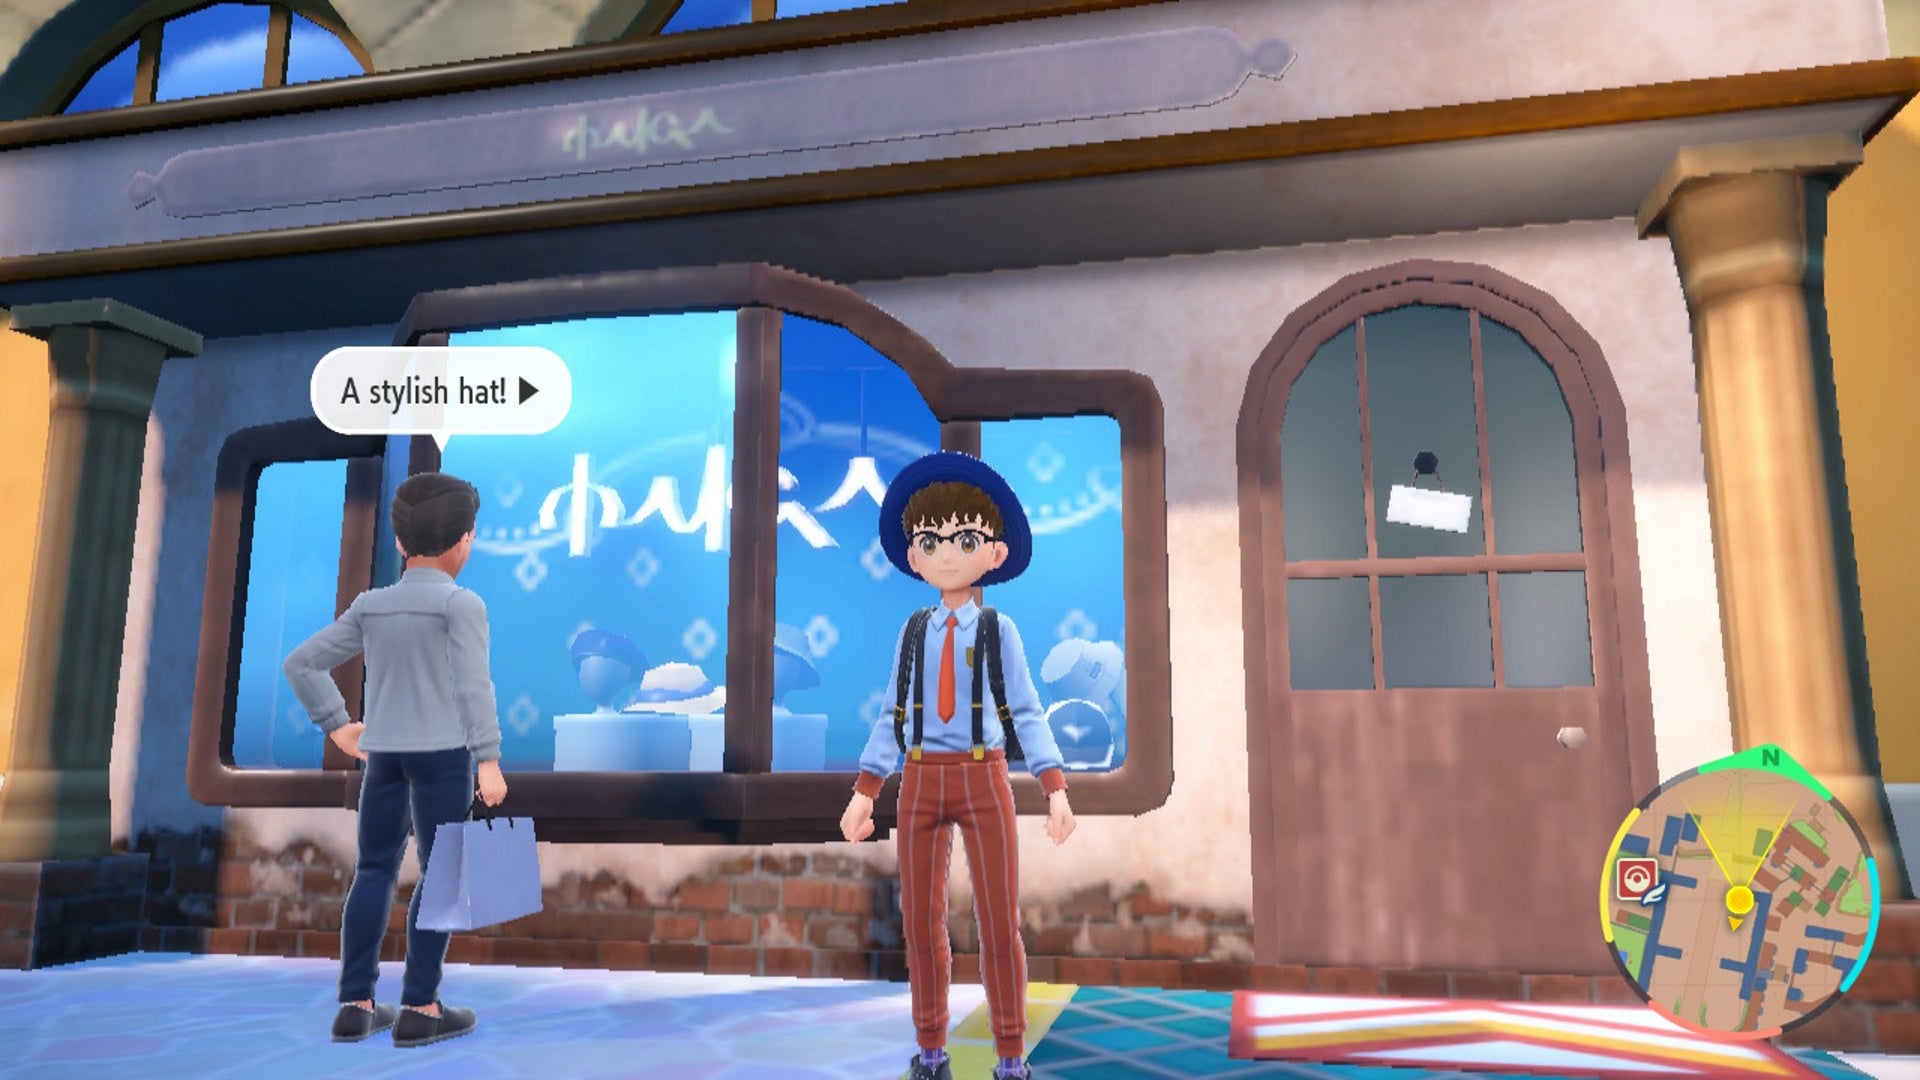 Change clothes in Scarlet and Violet: An anime child in a white shirt, blue hat, and orange pants stands in front of a white stone building with hats in a window display case